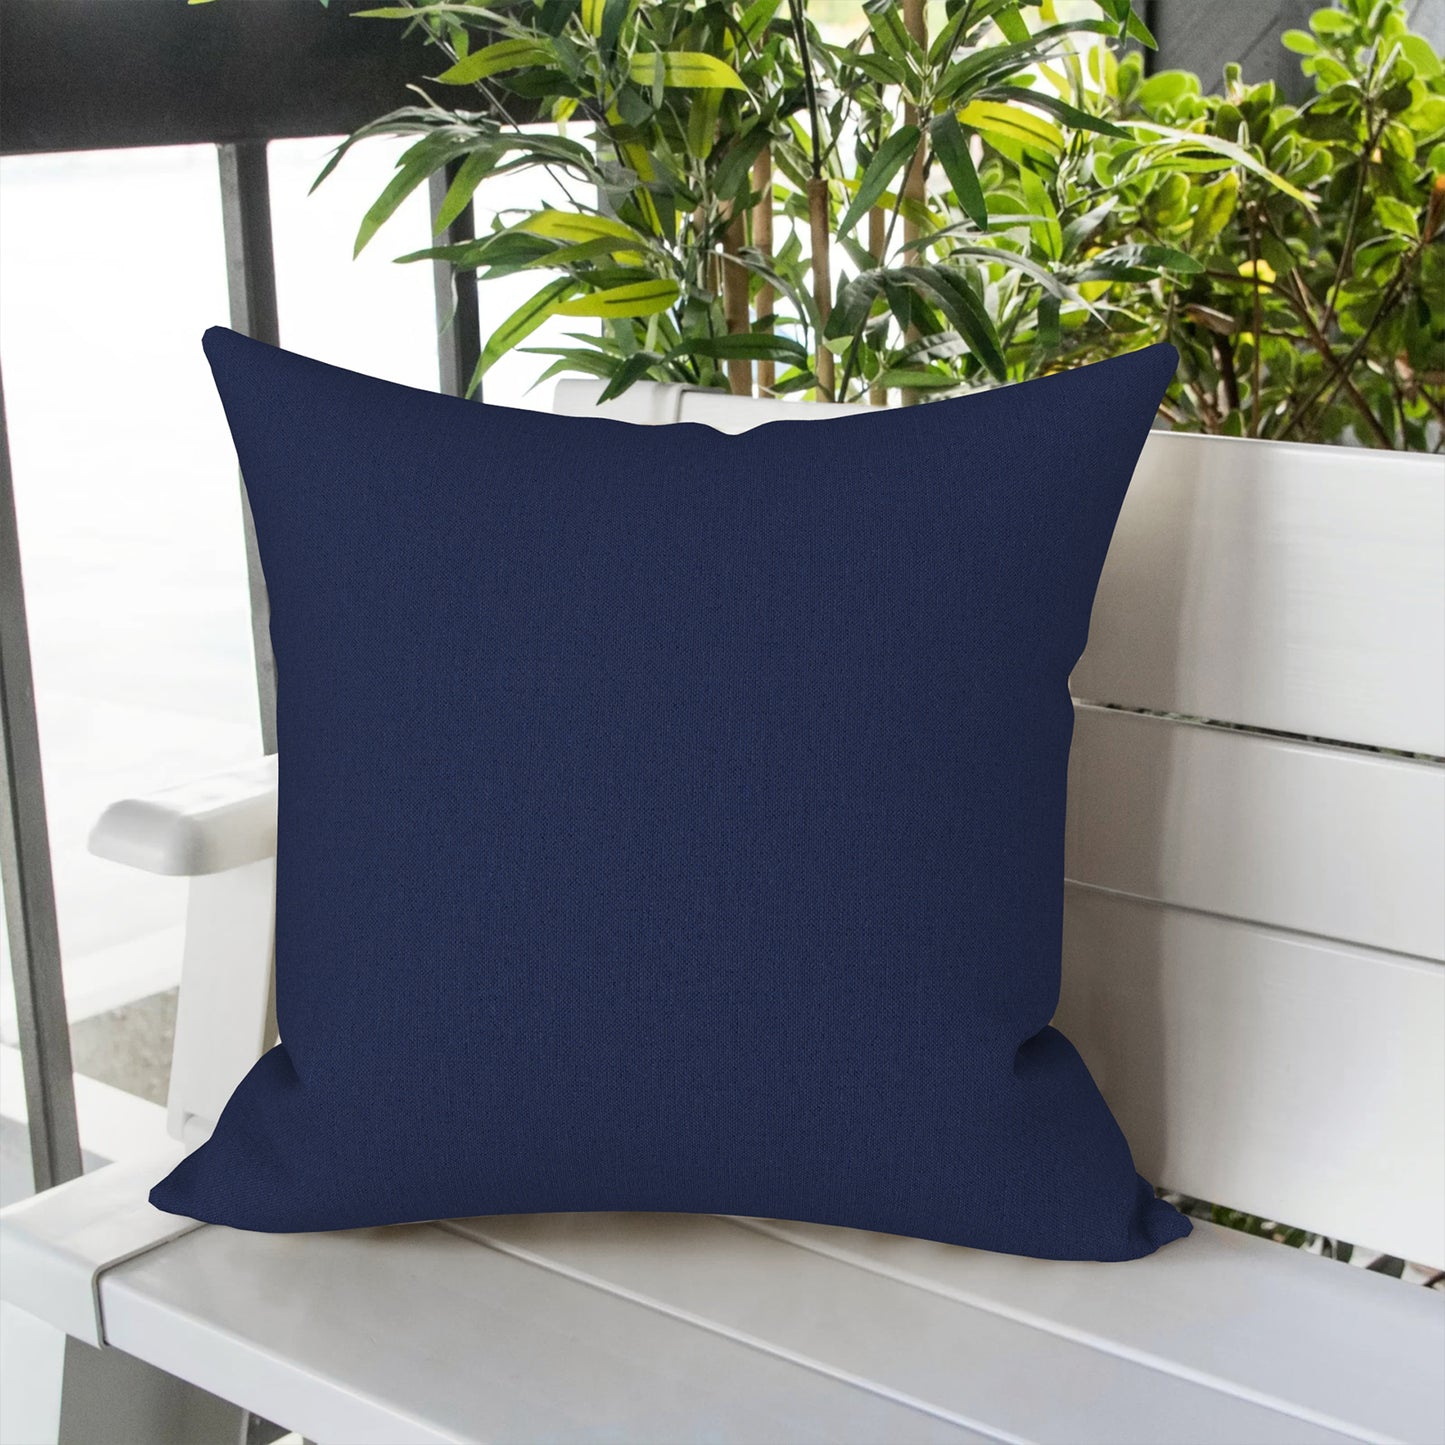 Melody Elephant Outdoor Throw Pillow Covers Pack of 2, Decorative Water Repellent Square Pillow Cases 18x18 Inch, Patio Pillowcases for Home Patio Furniture Use, Navy Blue